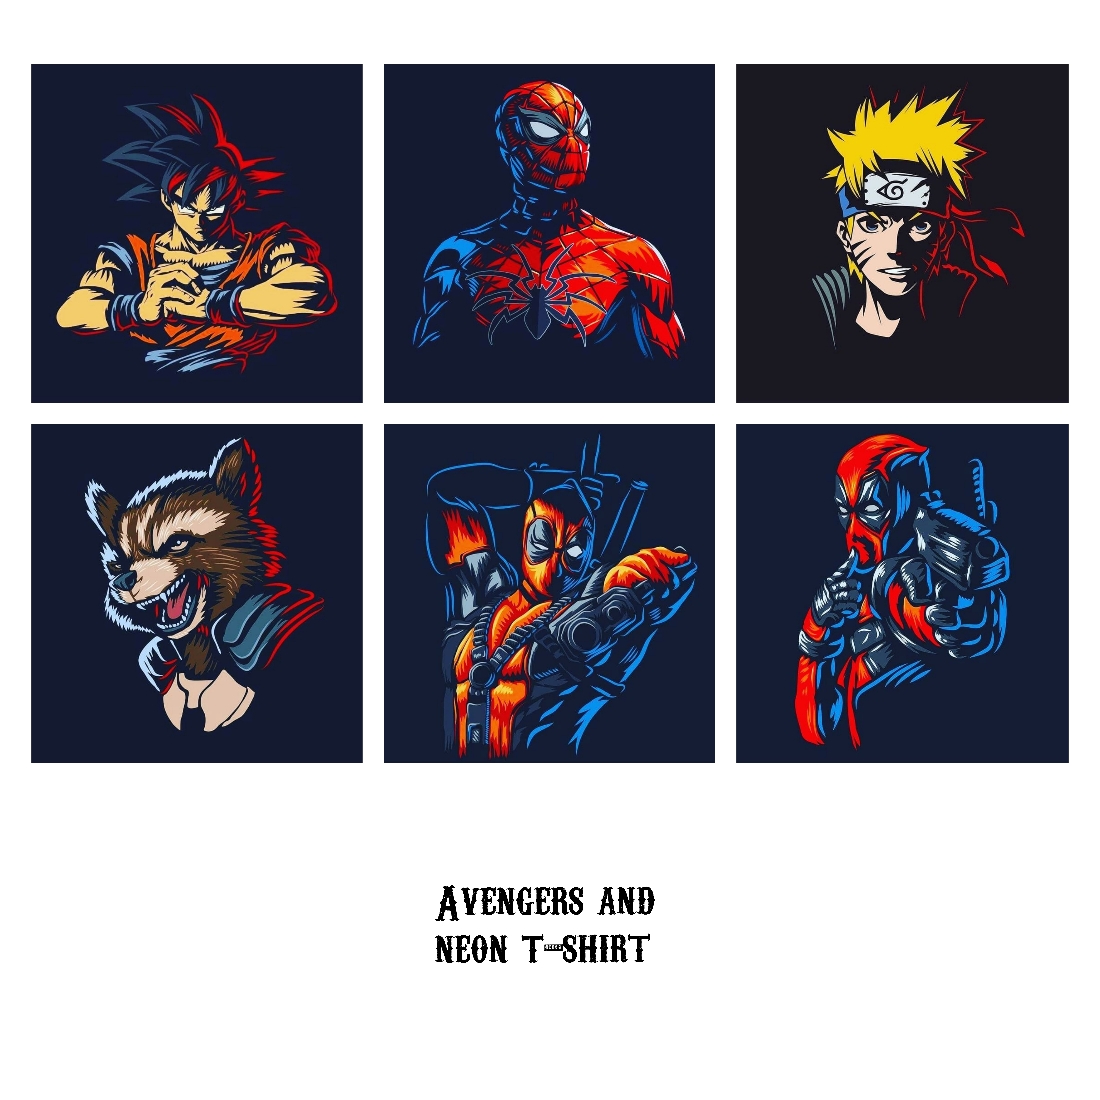 Avengers and neon t-shirt preview image.